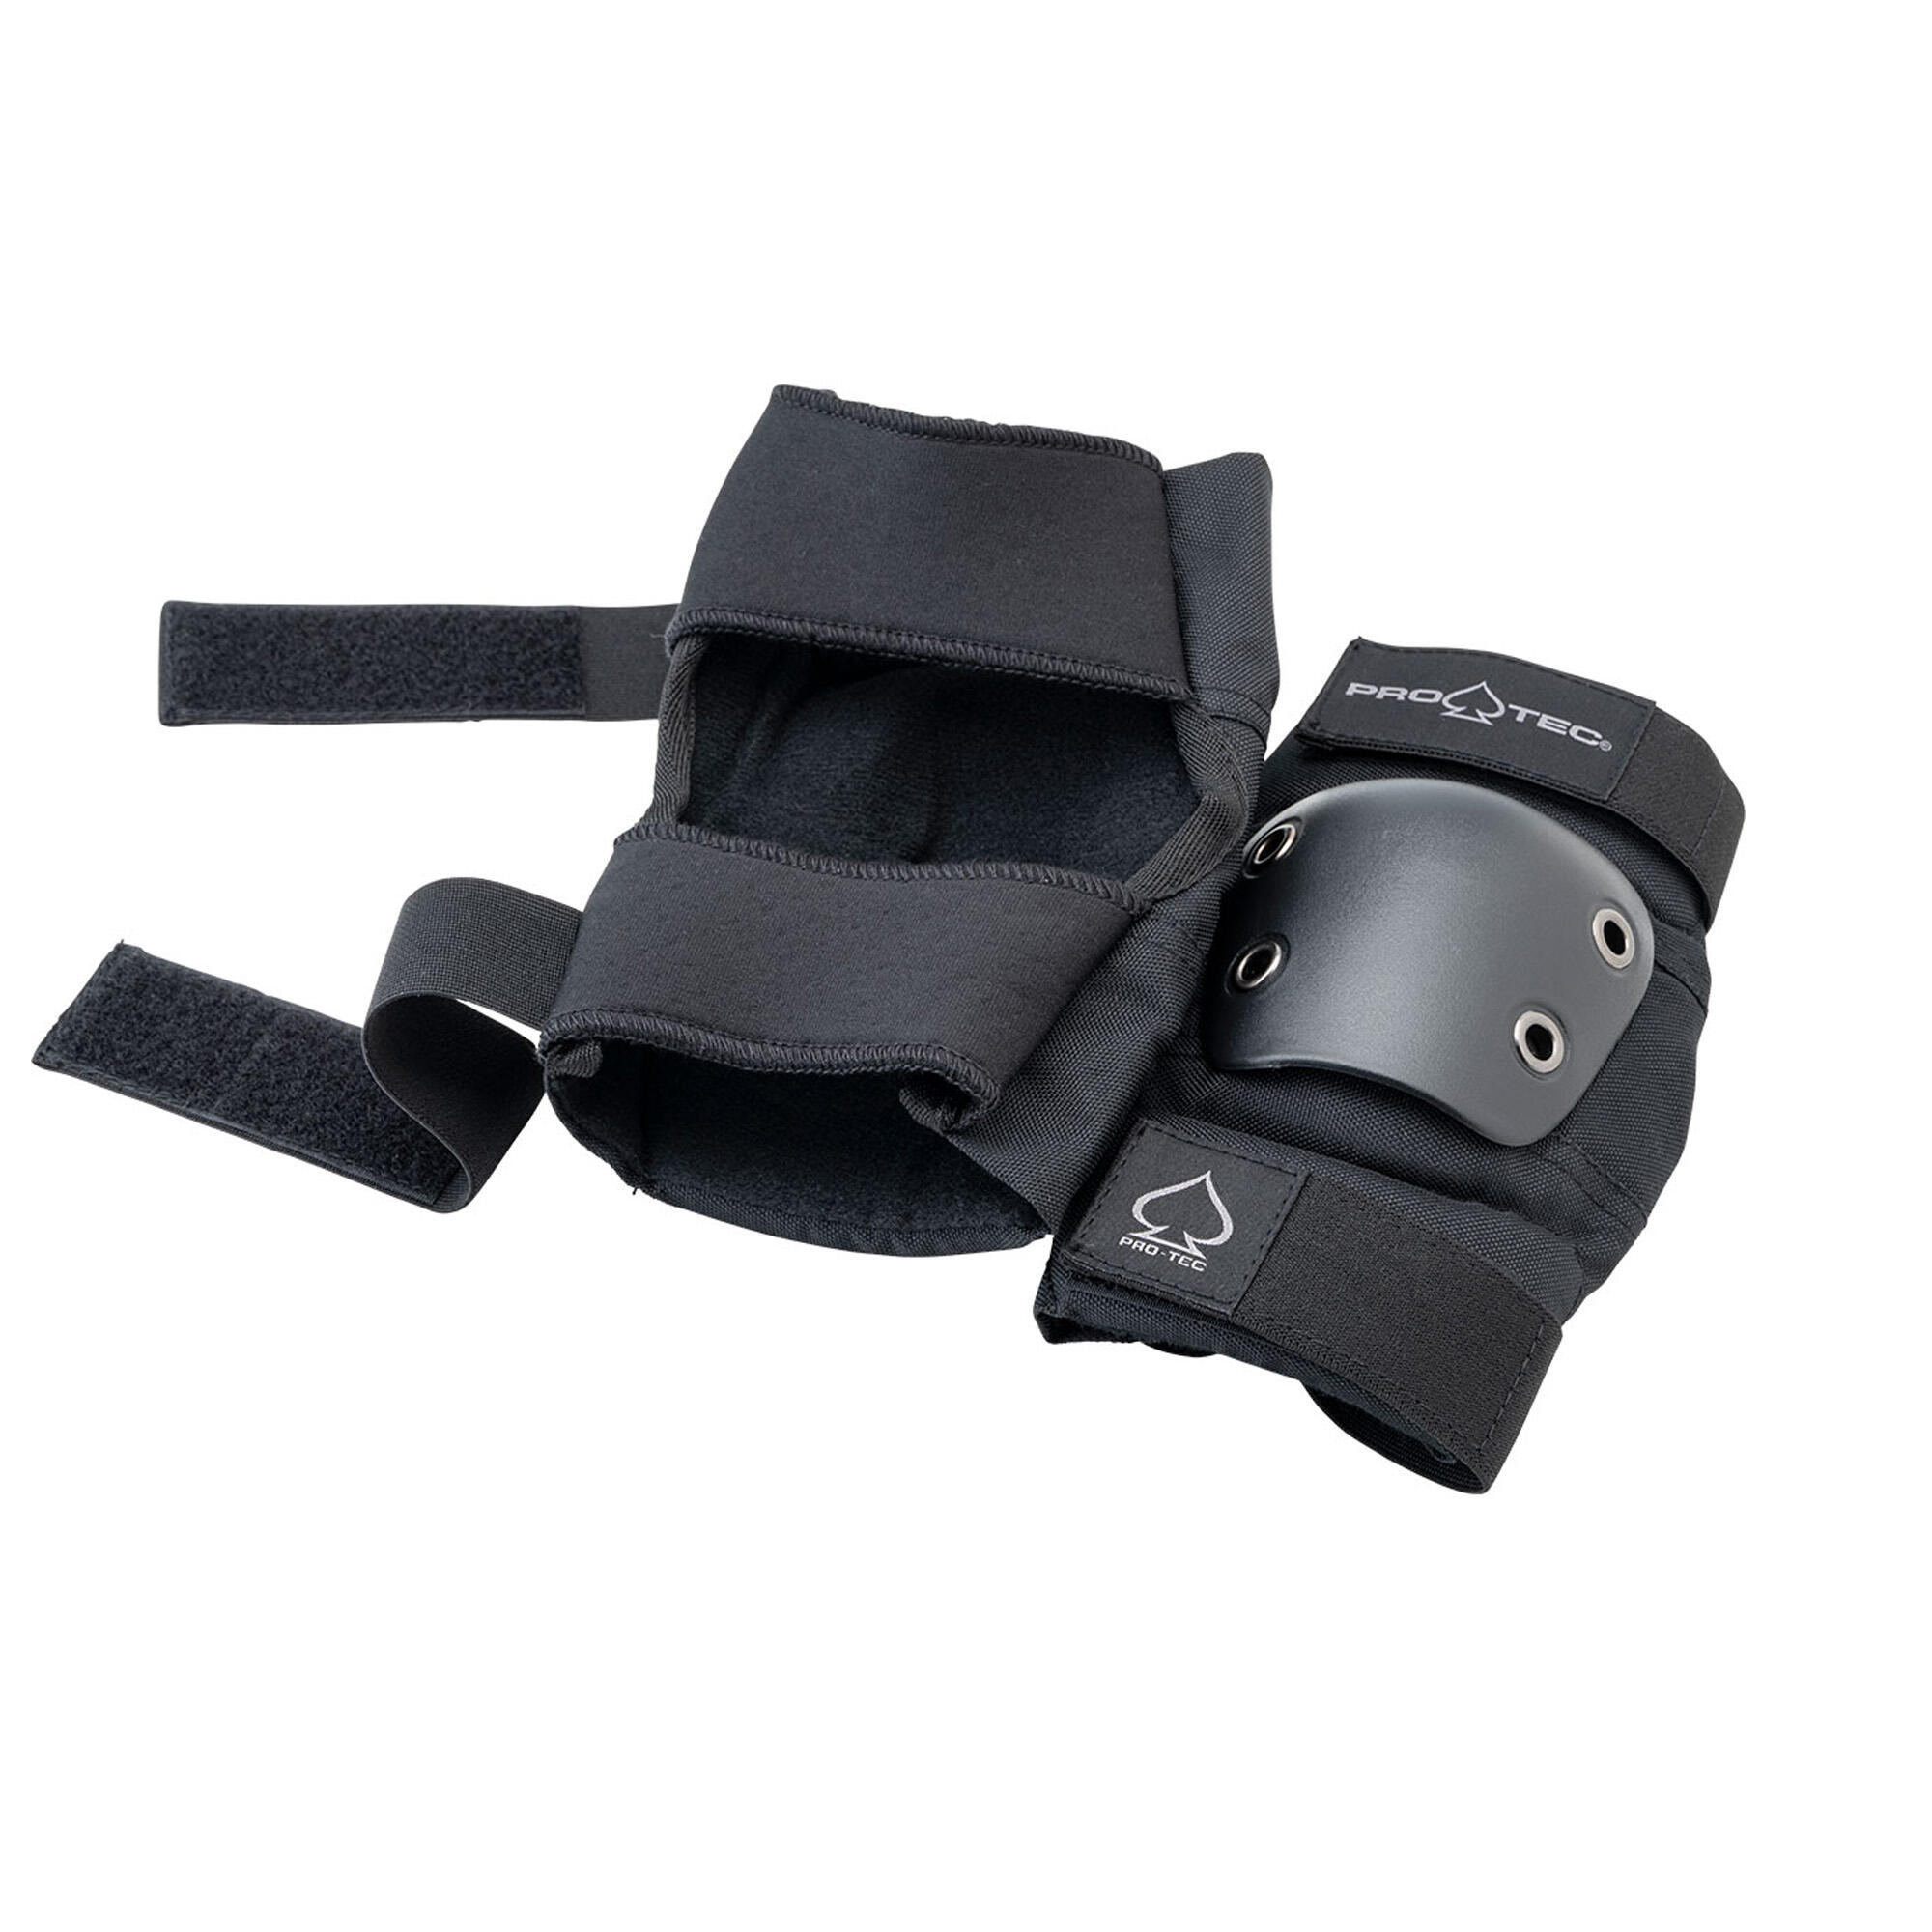 Adult Skateboarding Knee and Elbow Pads - Black 4/5